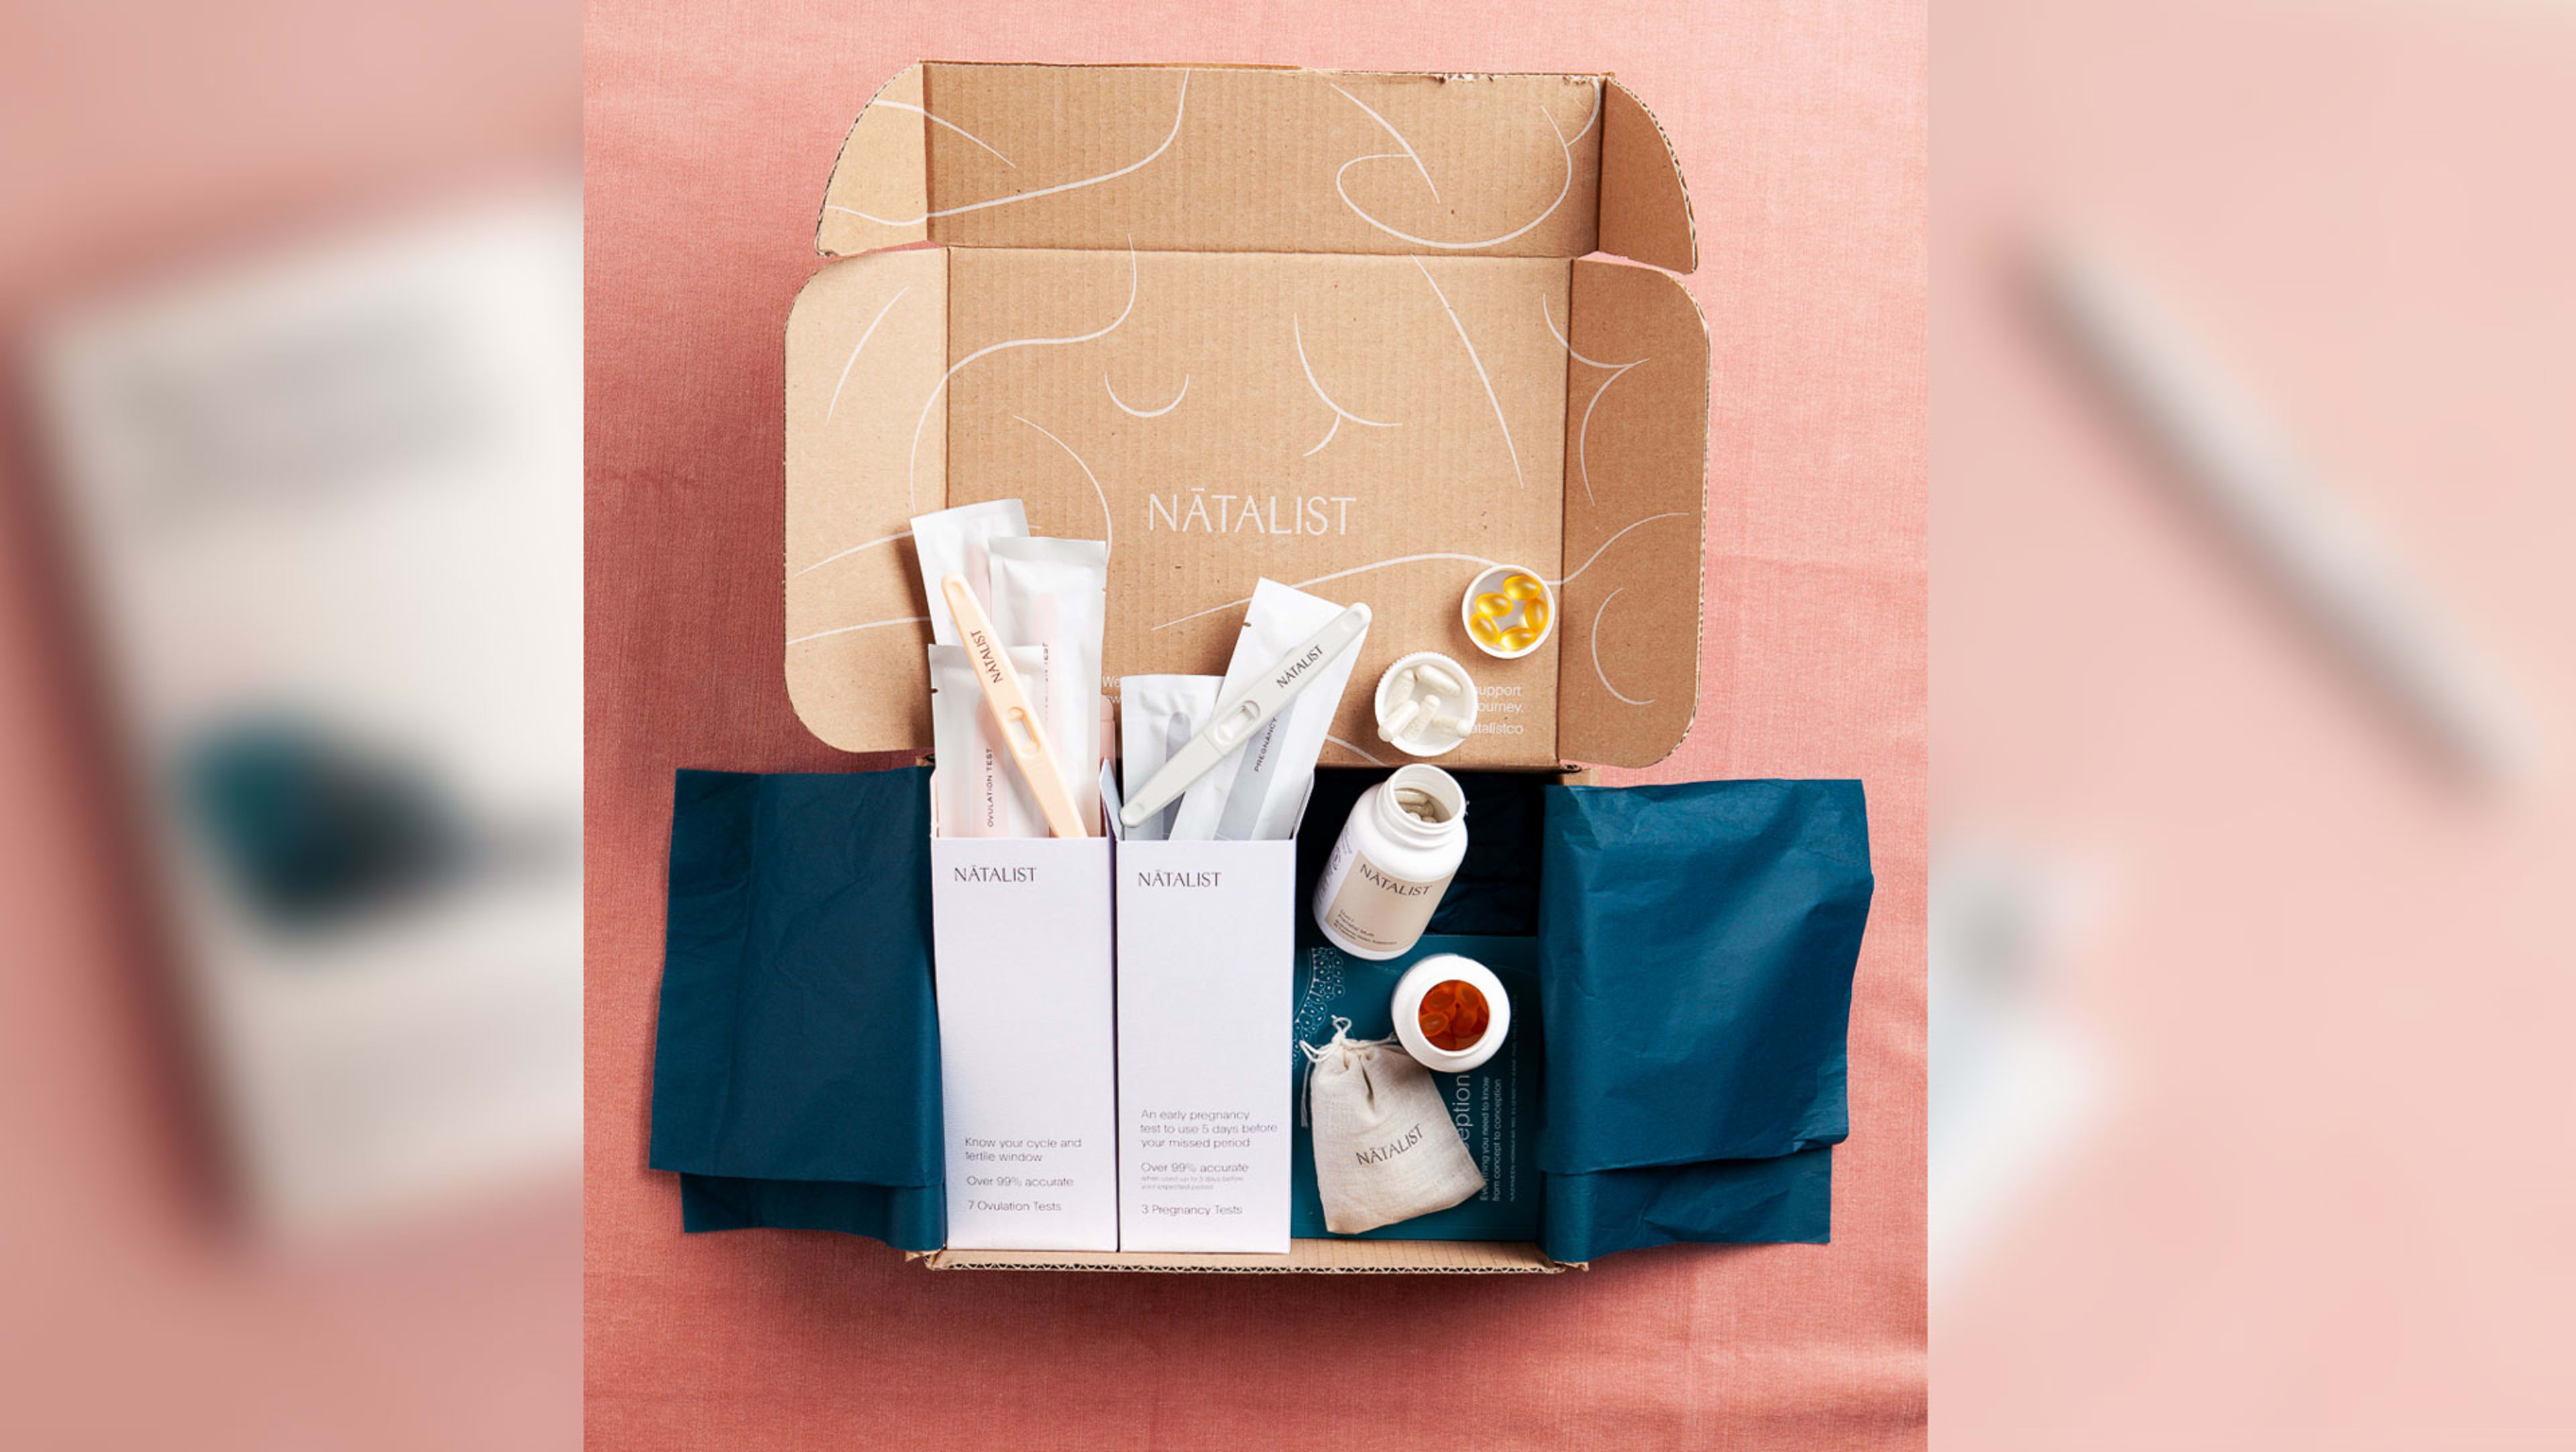 This monthly subscription box wants to get you pregnant